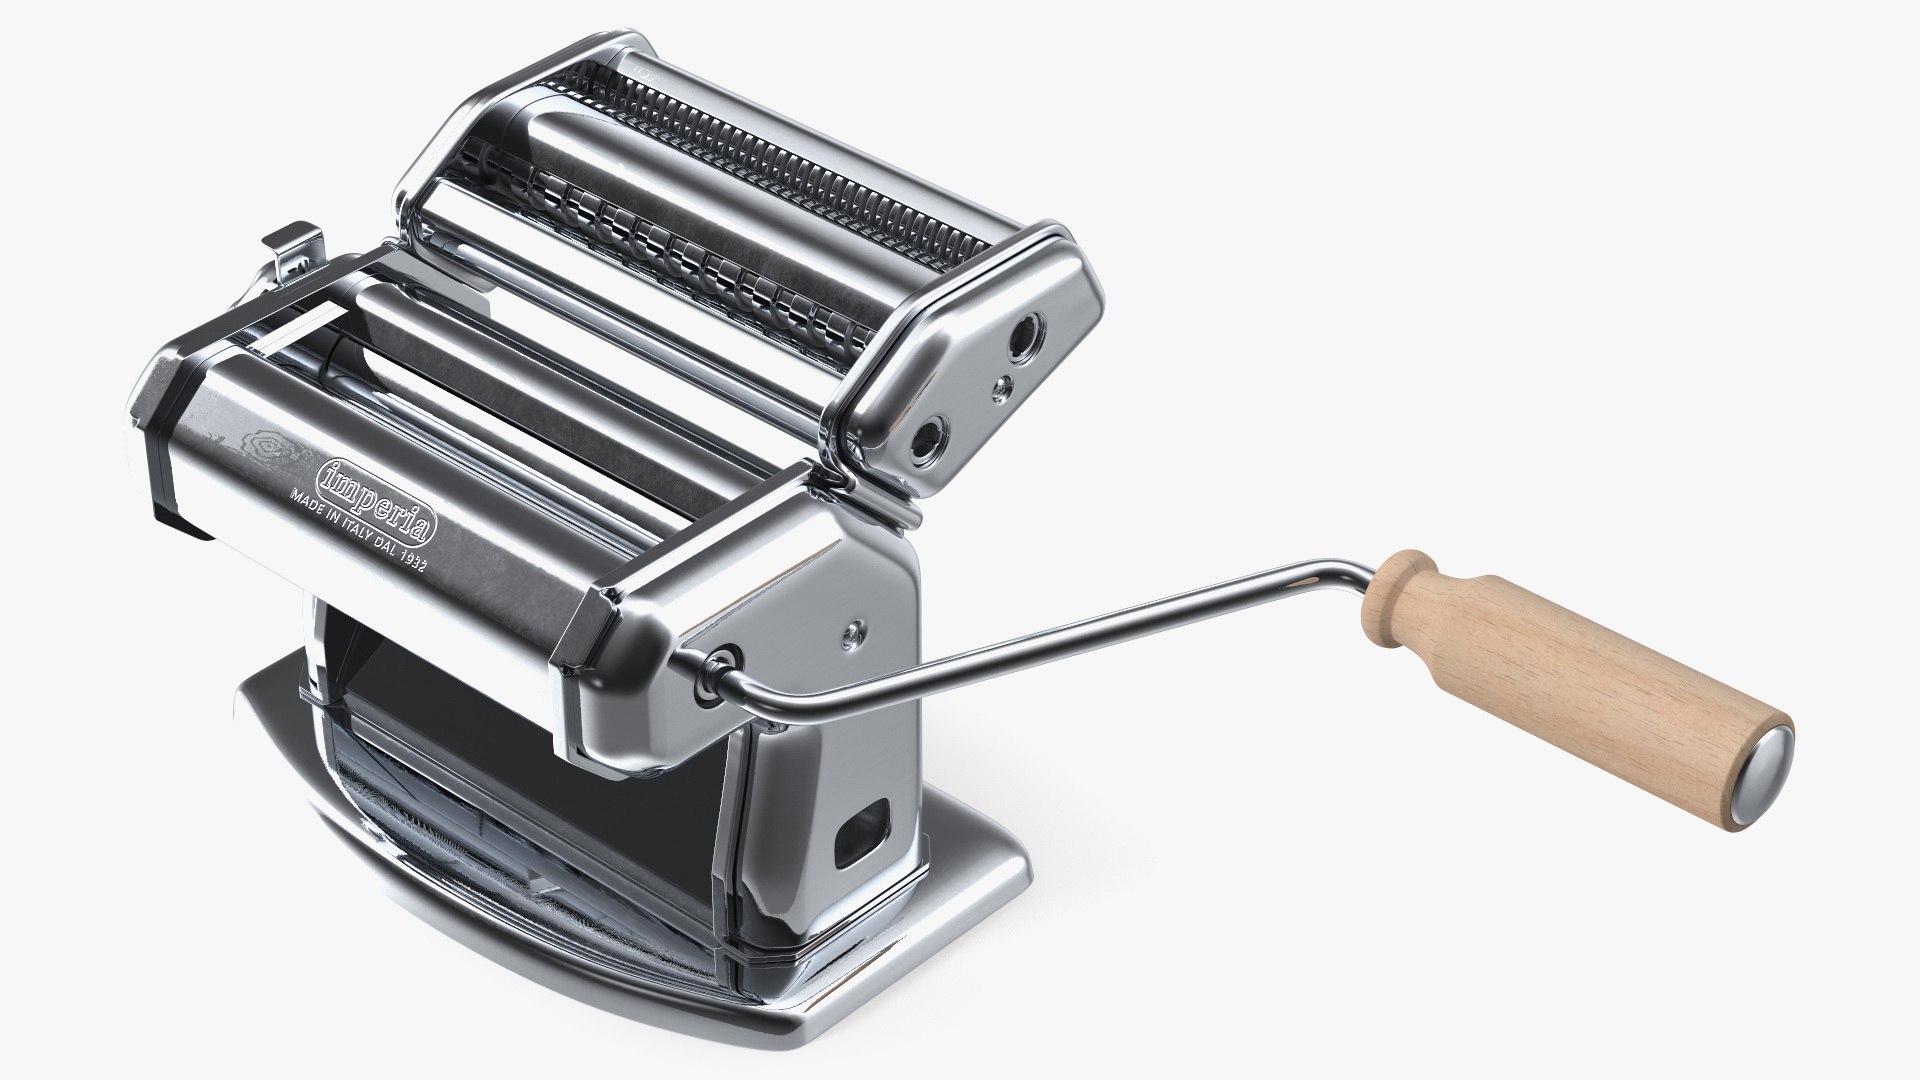 Imperia Pasta Maker Machine - household items - by owner